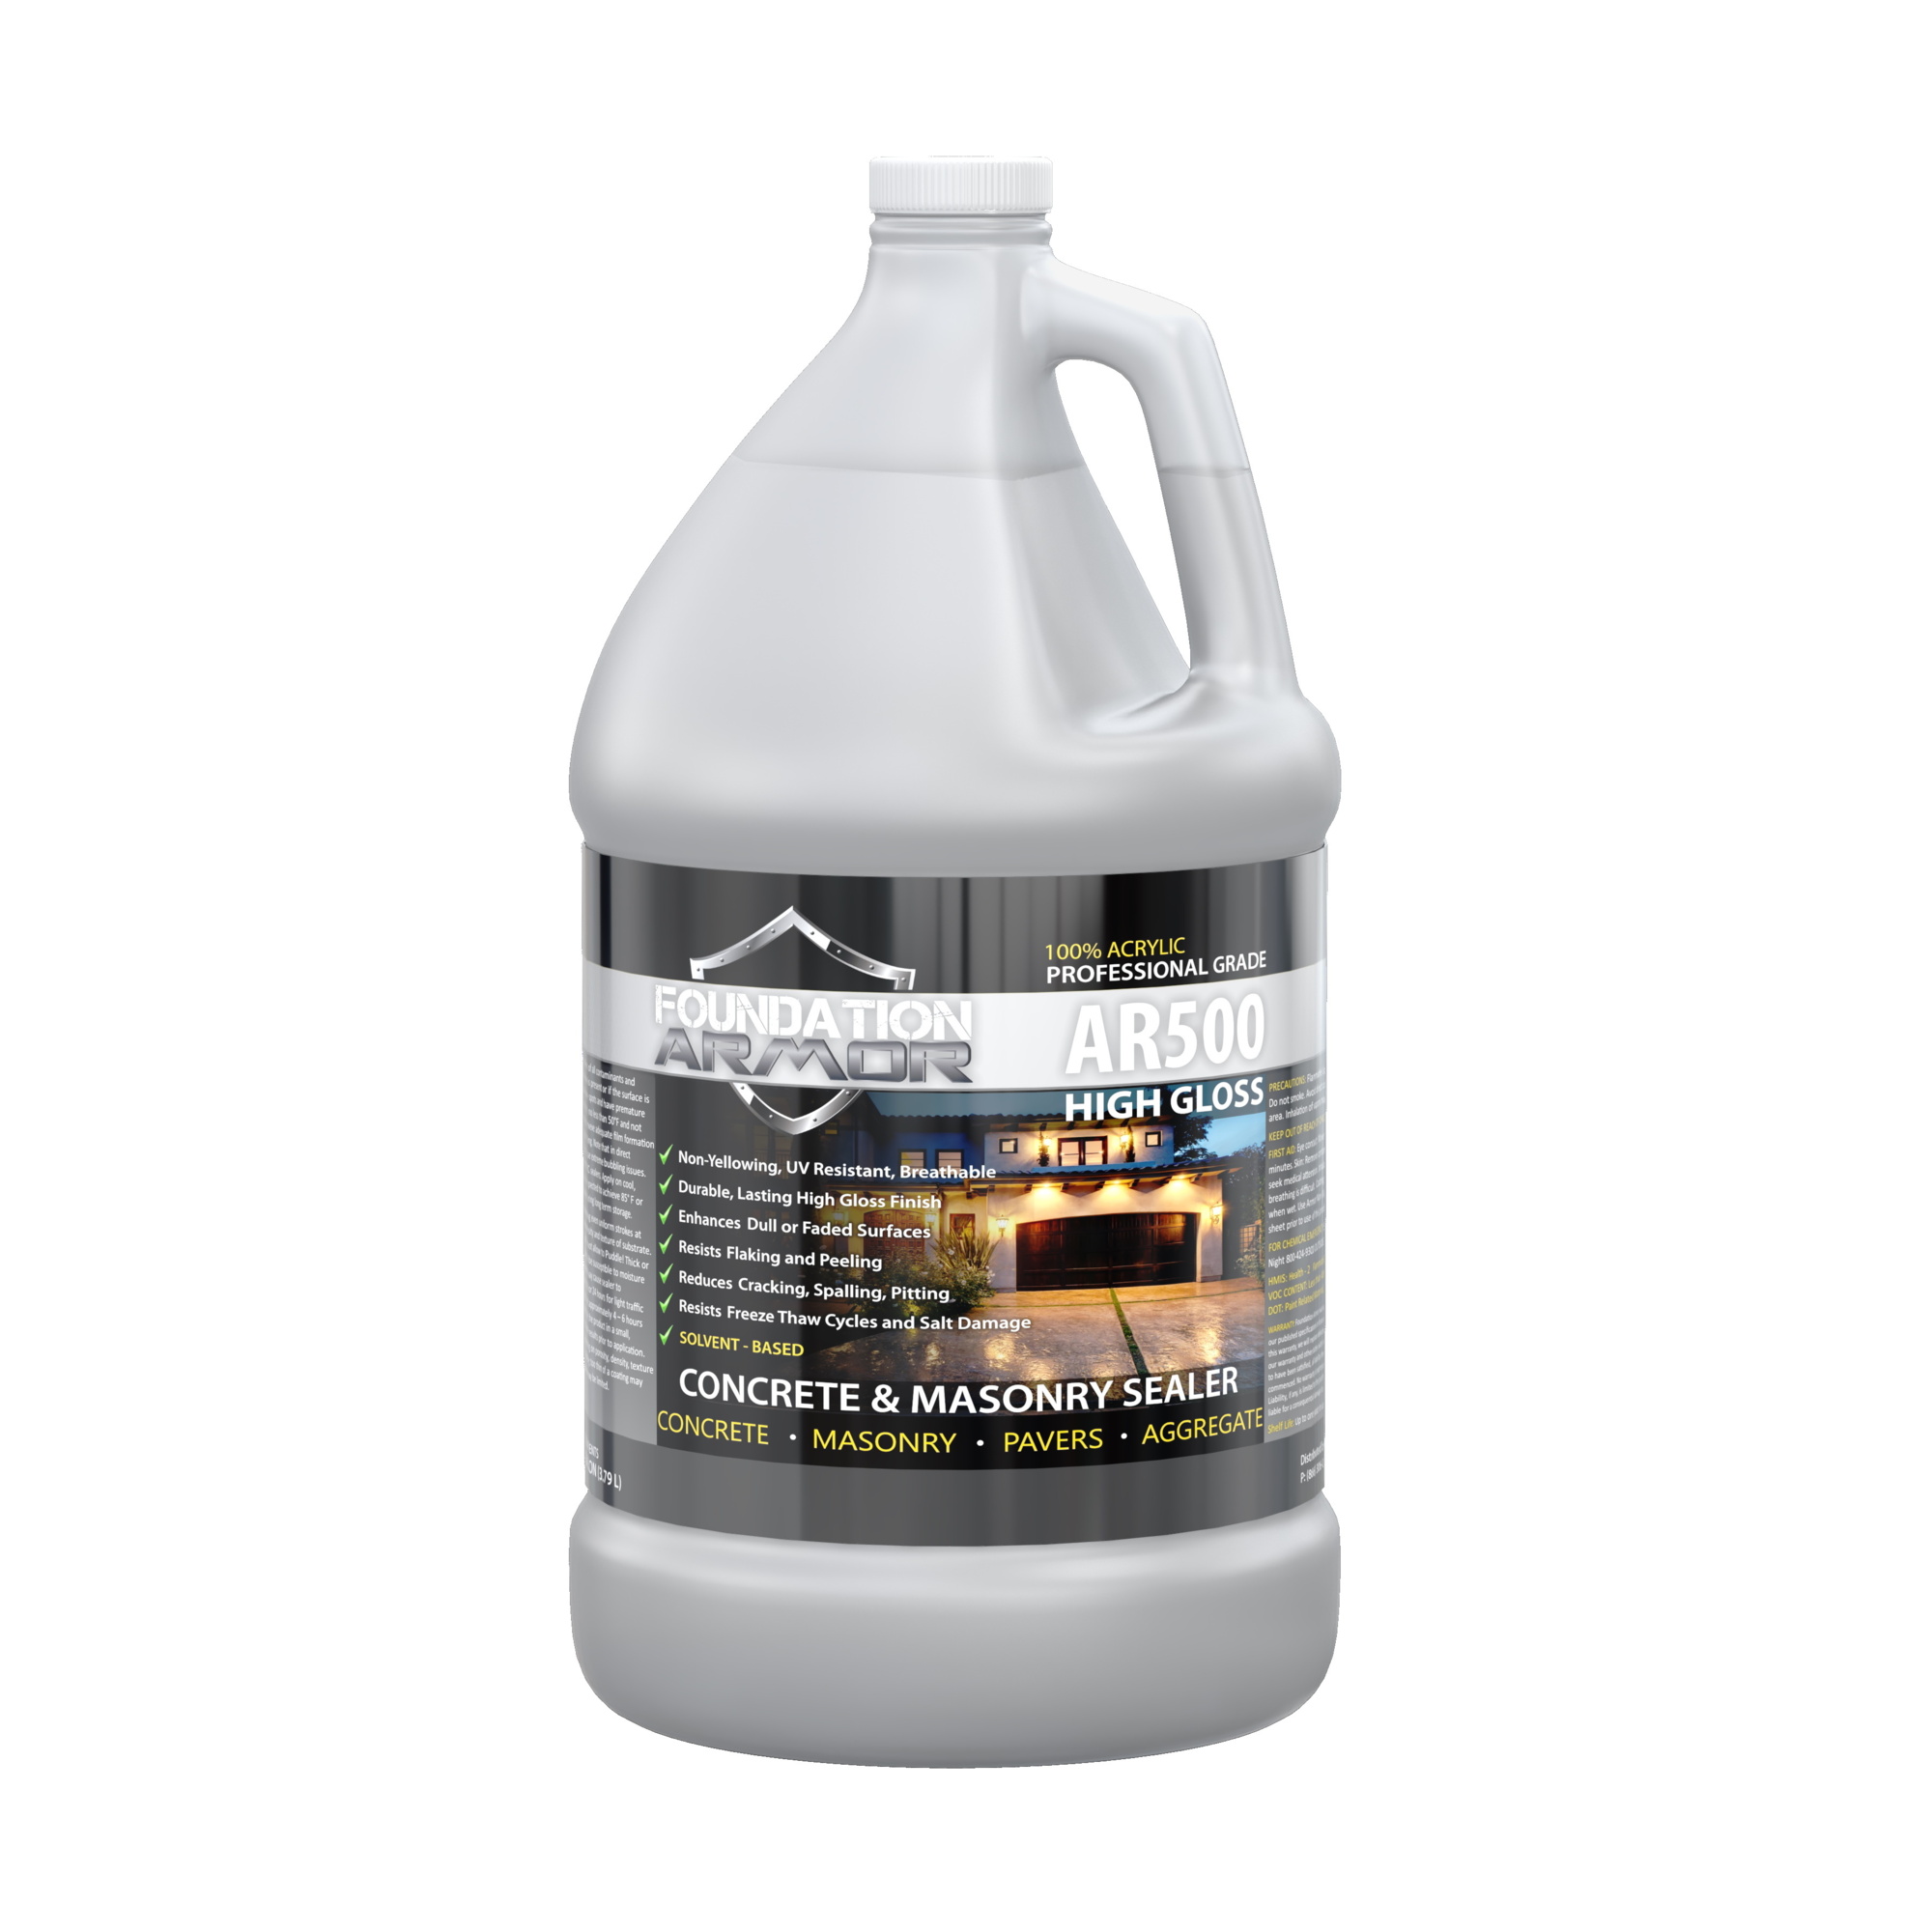 Foundation Armor, High Gloss Wet Look Concrete and Paver Sealer, Container Size 1 Gallon, Color Clear, Application Method Sprayer or Roller, Model